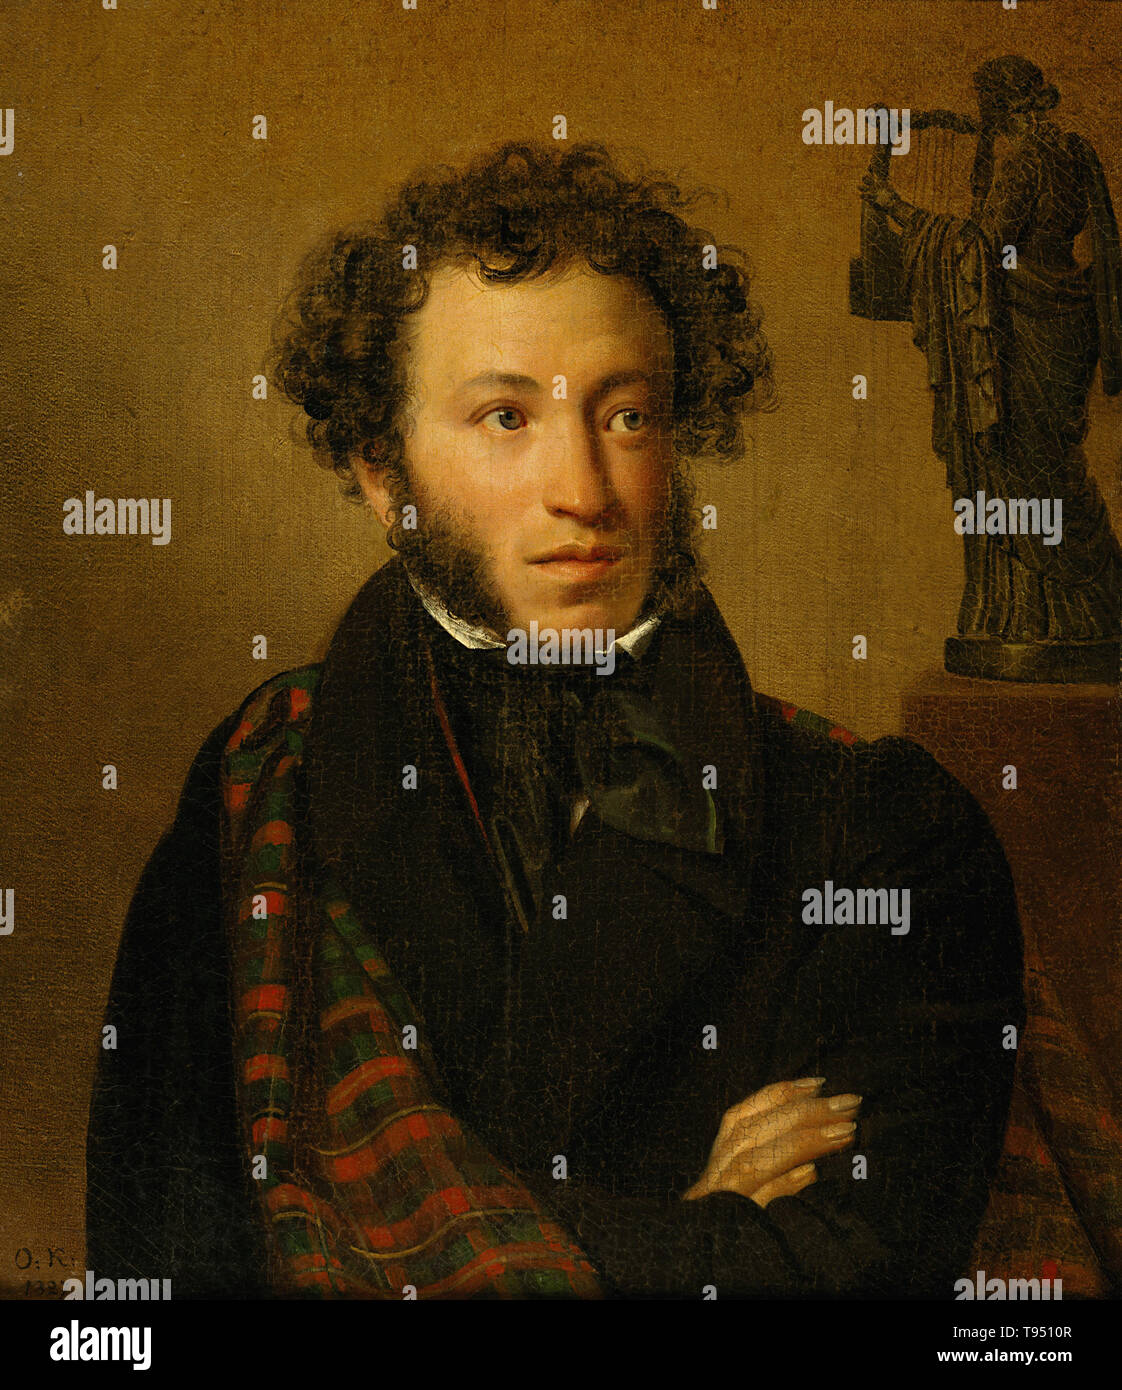 Pushkin portrait by Orest Kiprensky, 1827. Alexander Sergeyevich Pushkin (June 6, 1799 - February 10, 1837) was a Russian poet, playwright, and novelist of the Romantic era, considered by many to be the greatest Russian poet and the founder of modern Russian literature. Pushkin was born into Russian nobility in Moscow. He published his first poem at the age of 15, and was widely recognized by the literary establishment by the time of his graduation from the Tsarskoye Selo Lyceum. Stock Photo